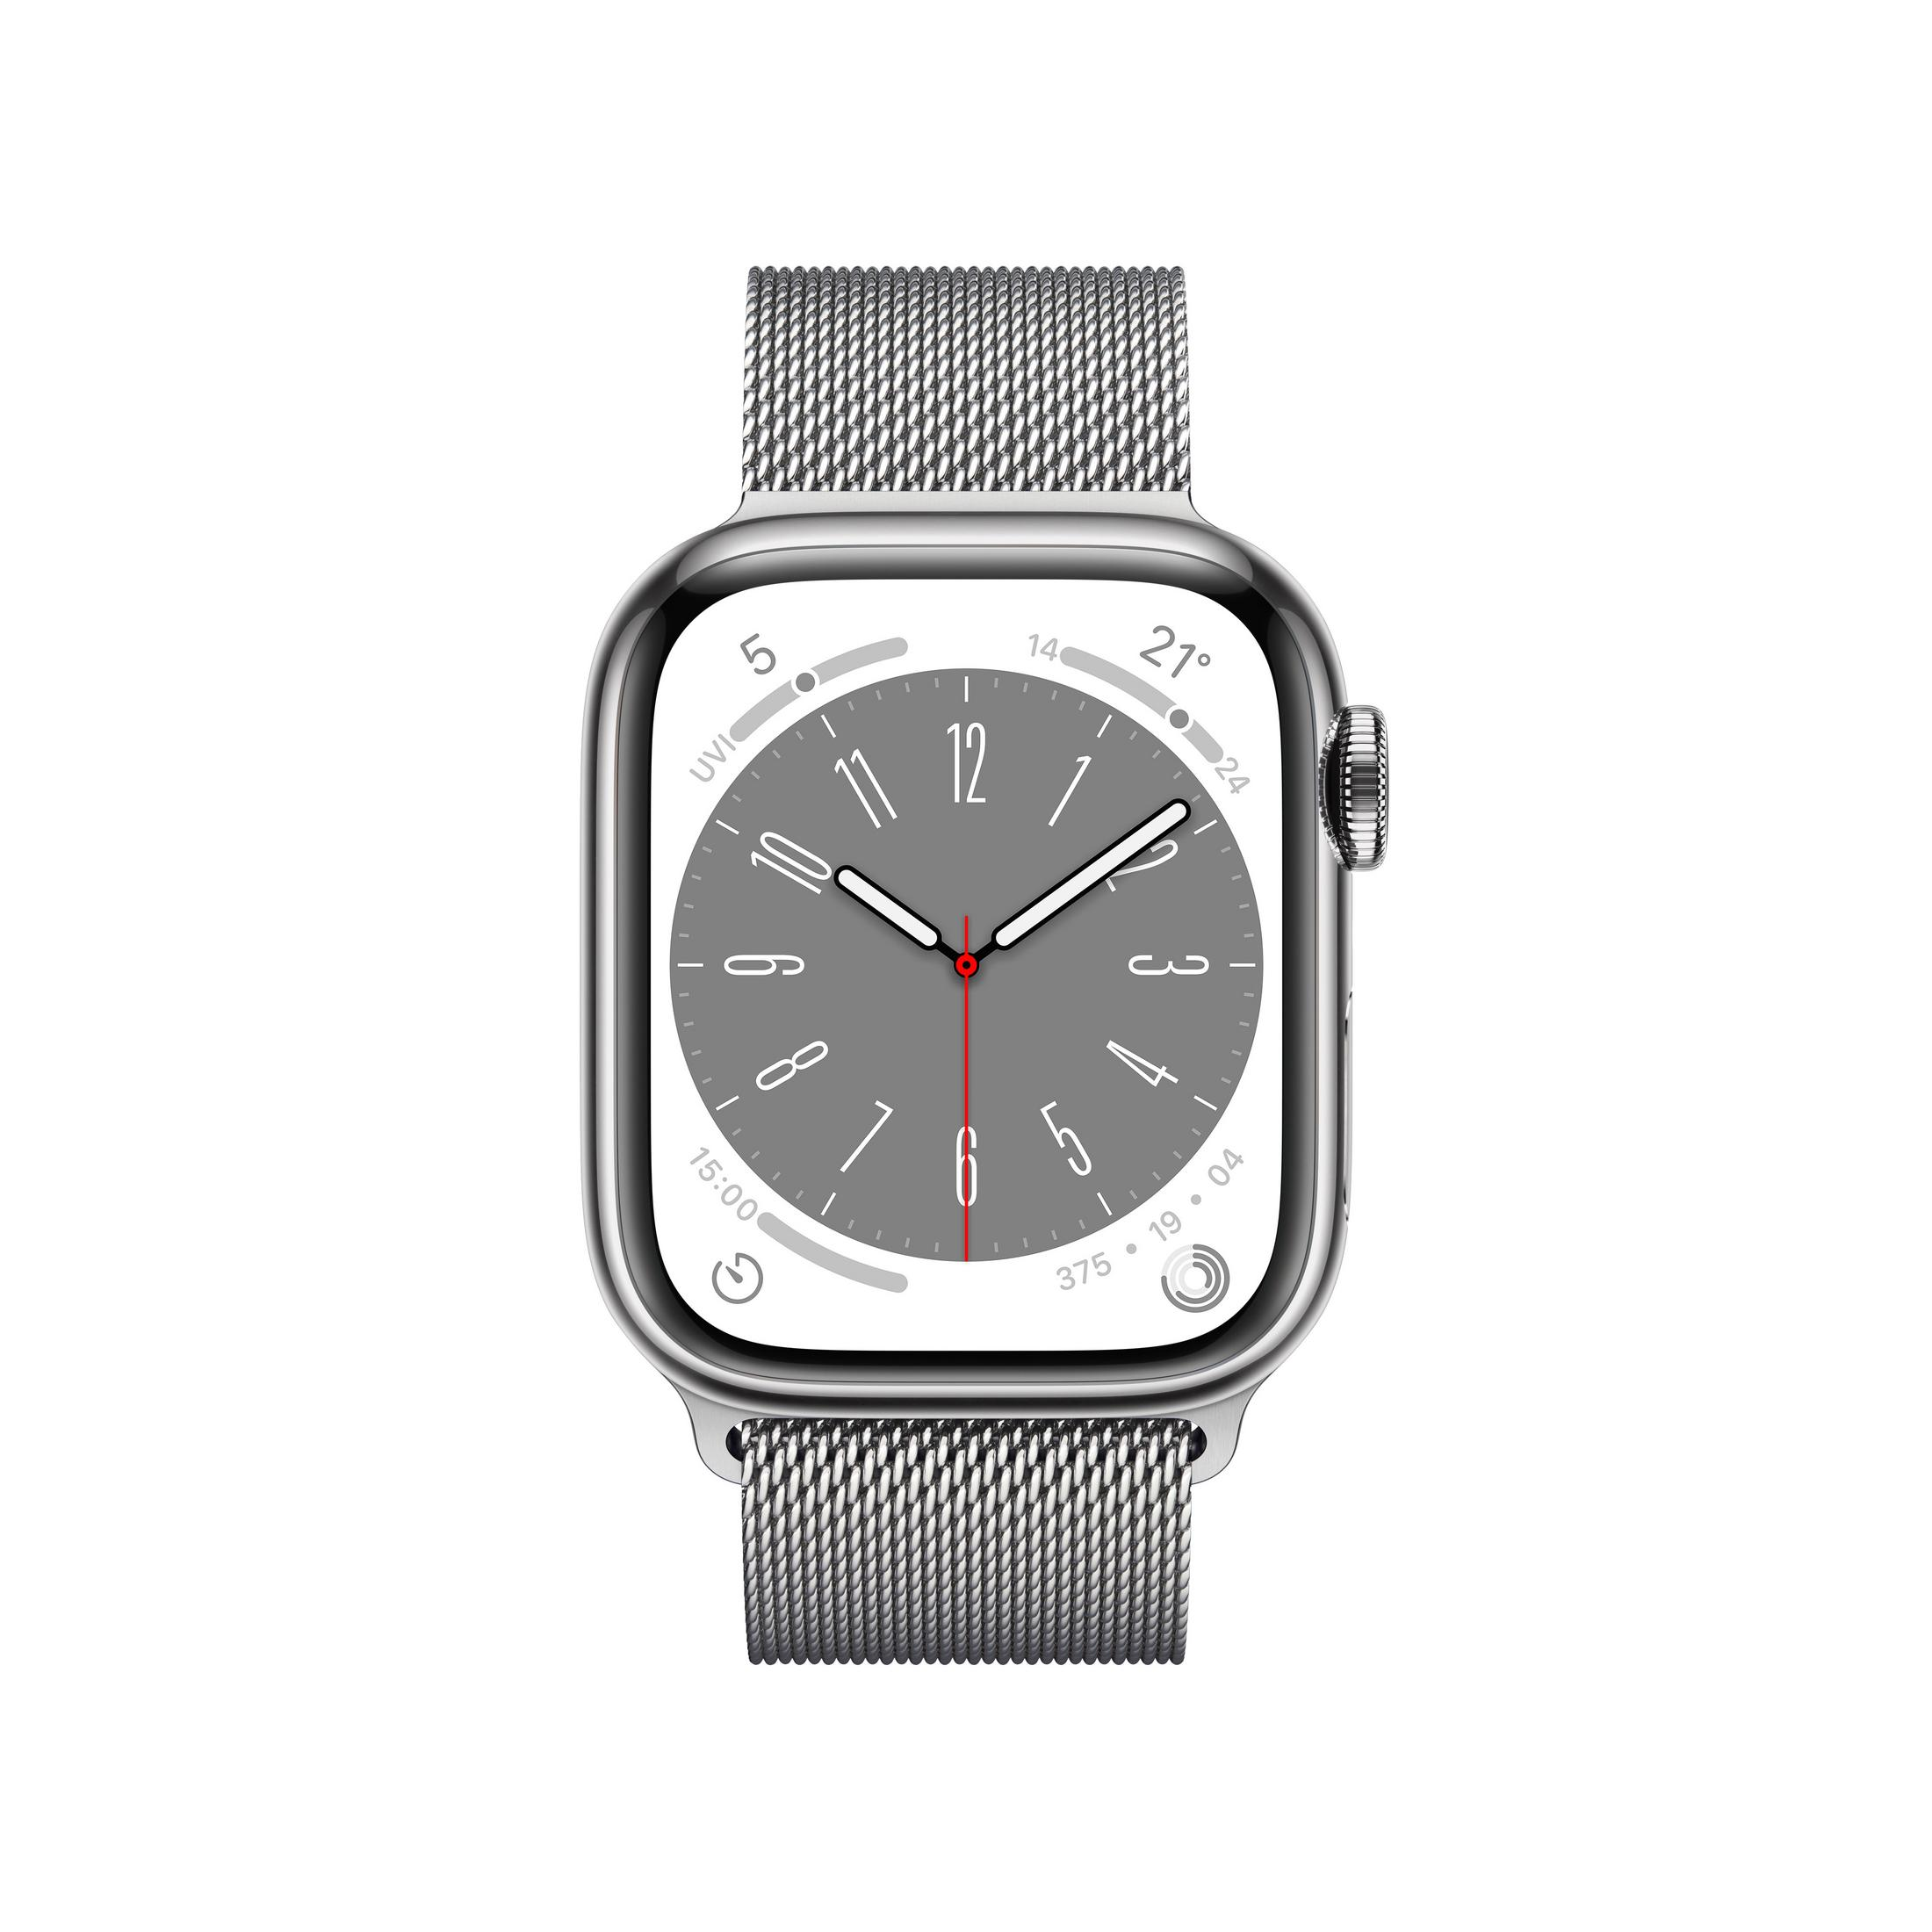 APPLE S8 GPS+CEL 130 Silber Gehäuse: STAINL 200 Silber, - MILANESE Milanaise, 41 ST Edelstahl mm, Smartwatch WITH SIL Armband: SIL W